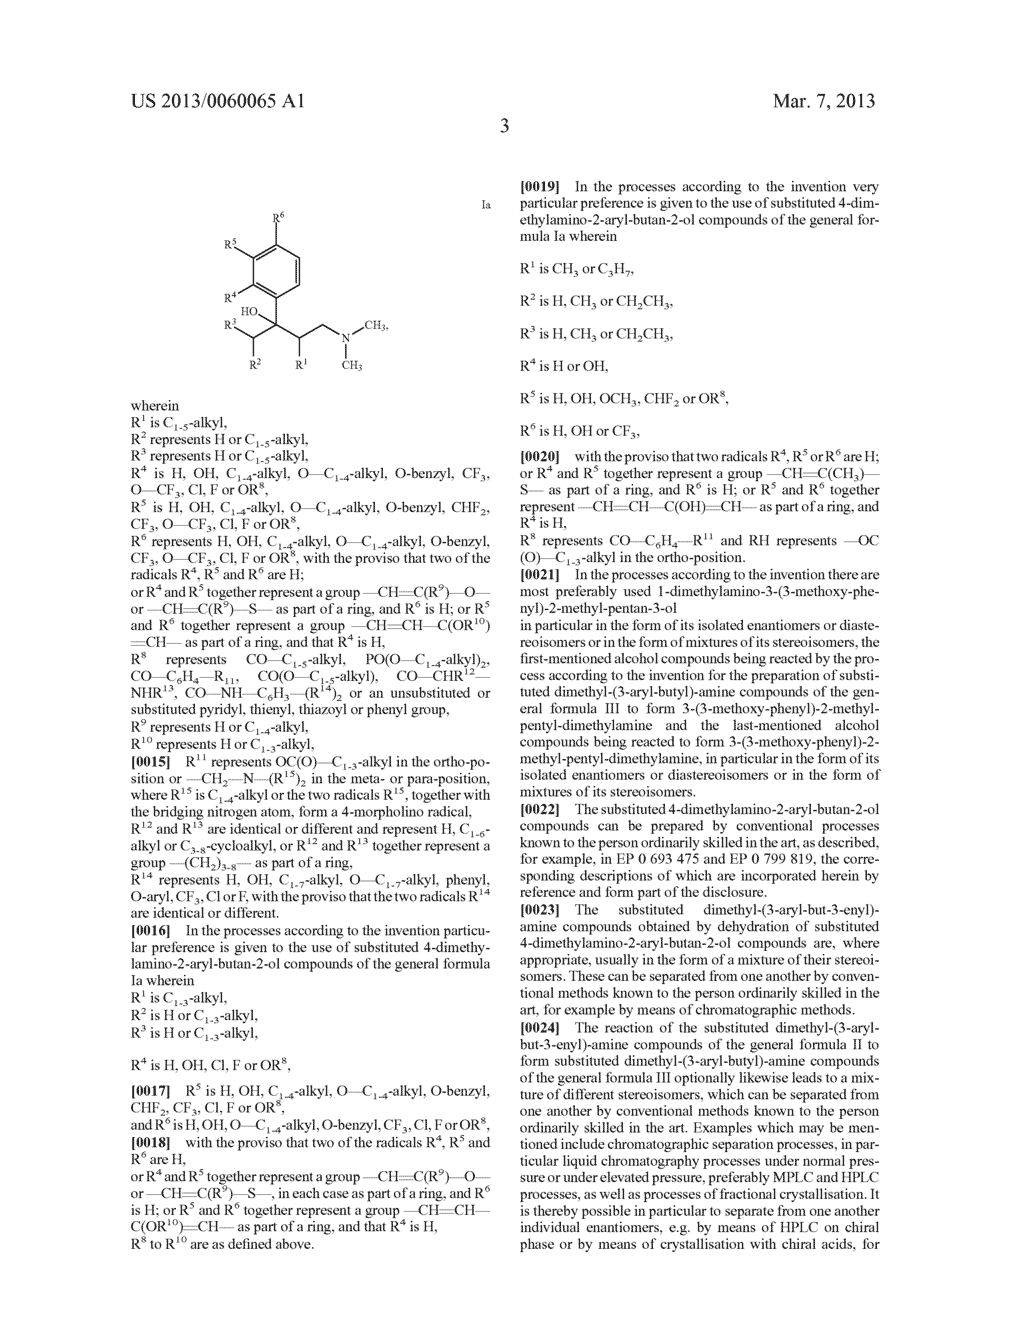 Process for the Dehydration of Substituted     4-Dimethylamino-2-aryl-butan-2-ol Compounds and Process for the     Preparation of Substituted Dimethyl-(3-aryl-butyl)- Amine Compounds by     Heterogeneous Catalysis - diagram, schematic, and image 04